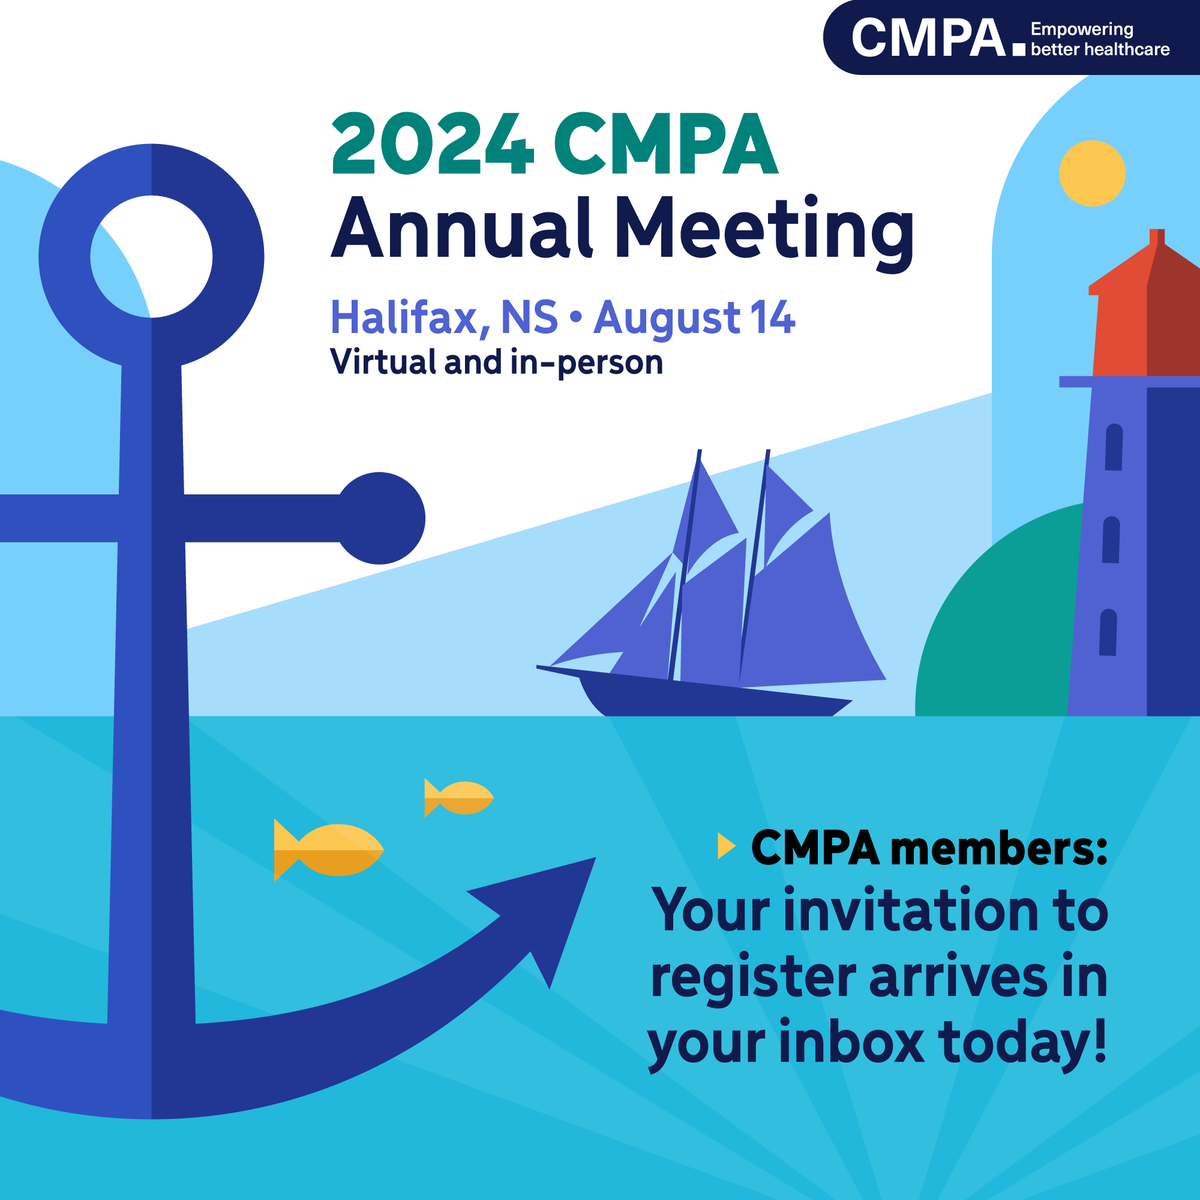 CMPA members: Drop anchor ⚓️ in Halifax this summer. ☀️ You’re invited to the 2024 CMPA Annual Meeting! (Join us in-person or virtually.) Your invitation sails into your email inbox 📨today.